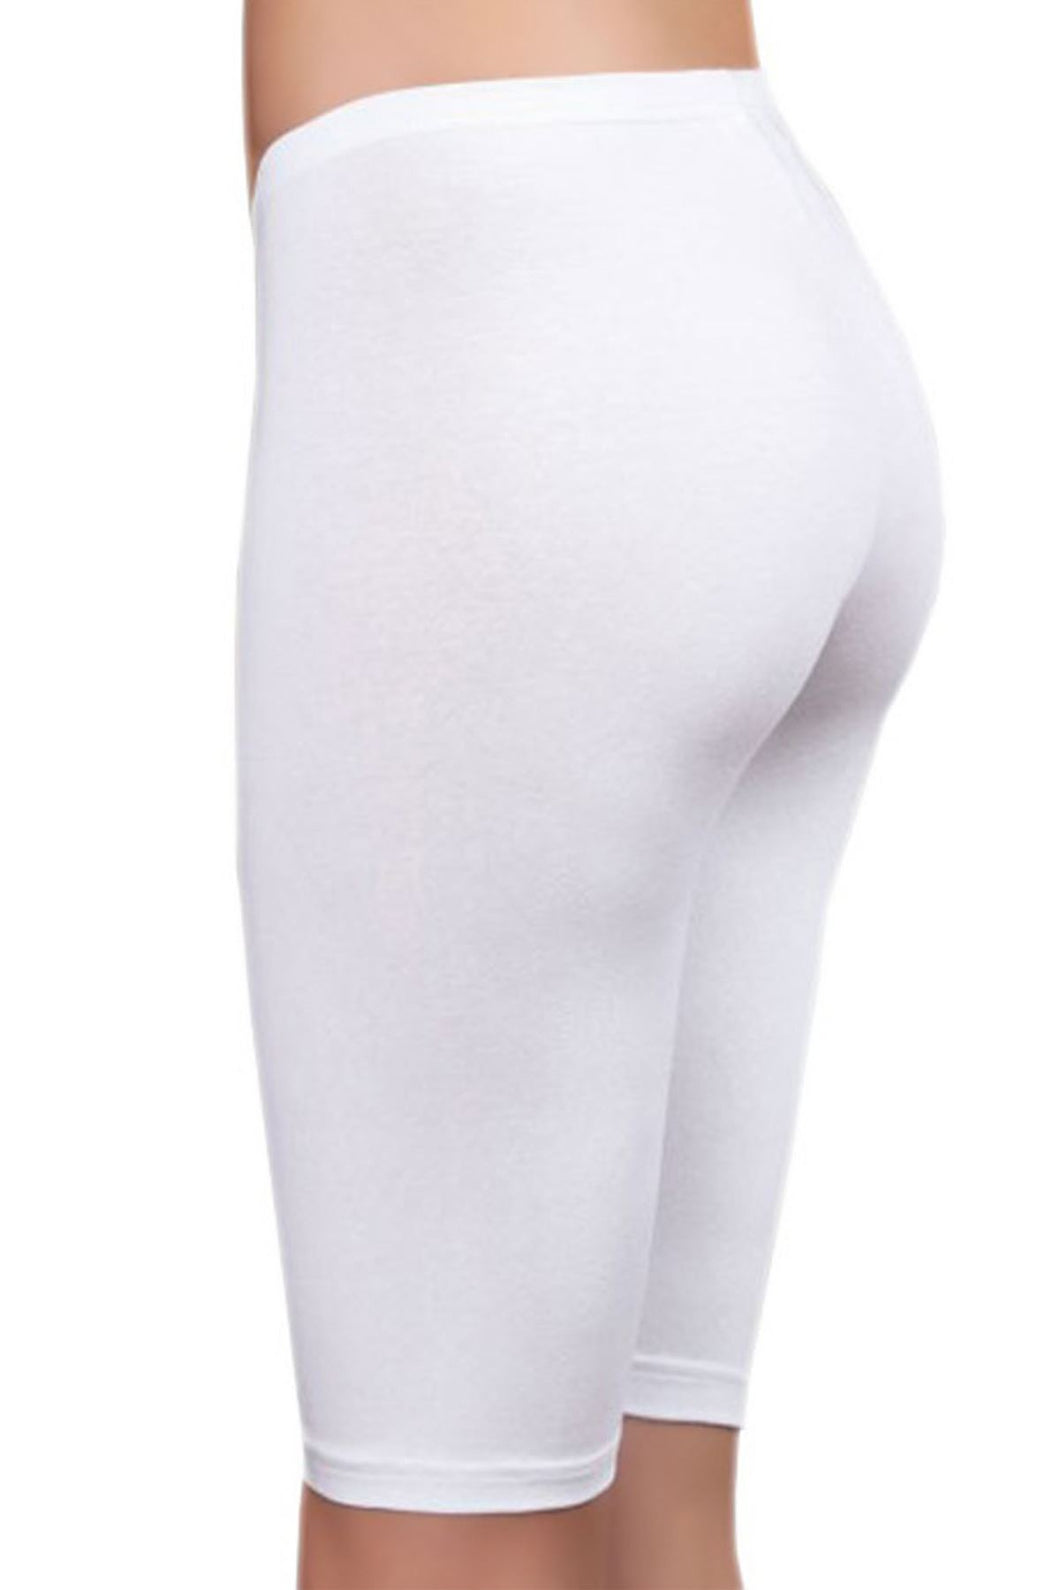 Buy FASO White Solid Cotton Slim Fit Women's Thermal Leggings | Shoppers  Stop